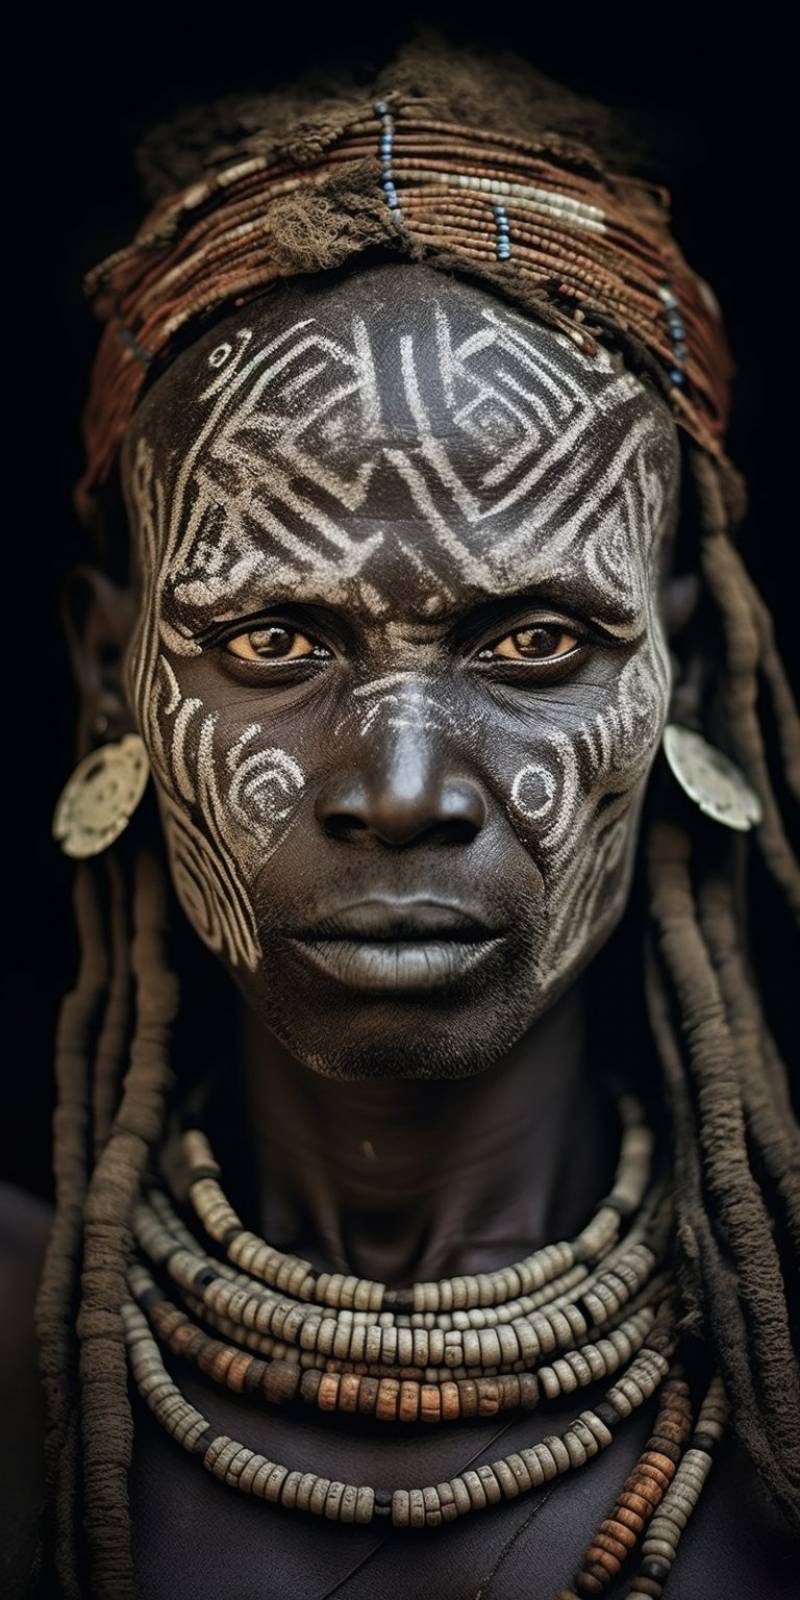 People omo valley up calm asymmetric ready astounding photograph splendid demonstrating the mischiefs wild of human activities on la people omo valley up calm asymmetric ready